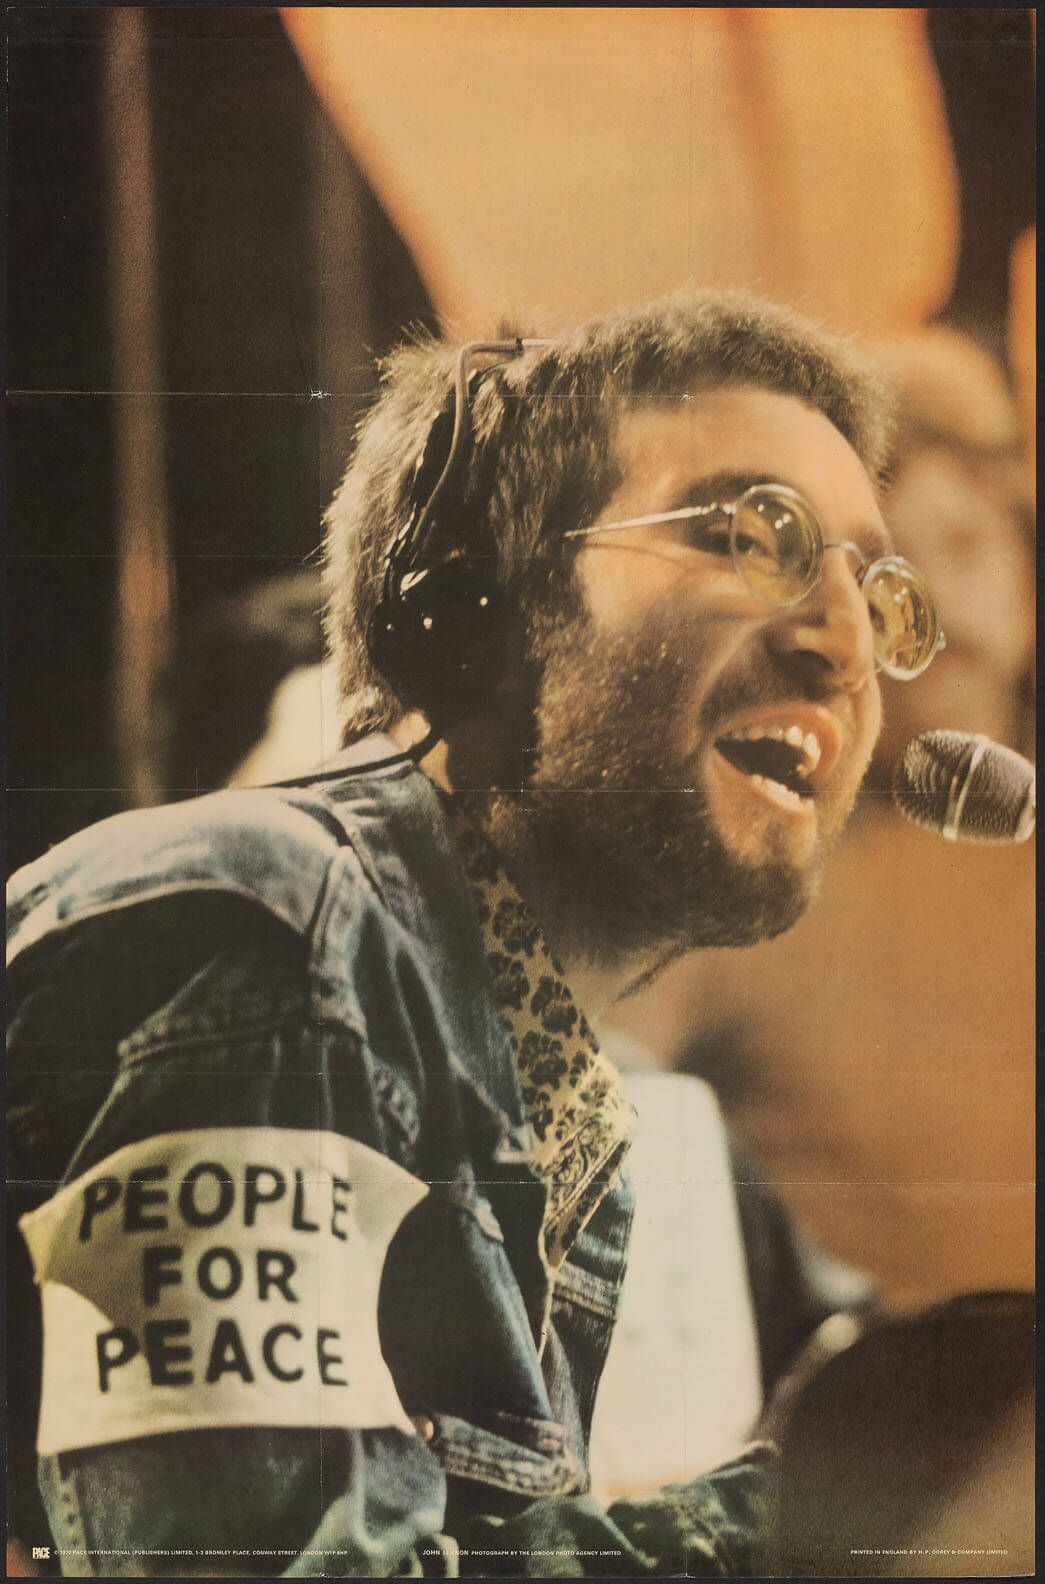 John Lennon - People for Peace British Personality Poster